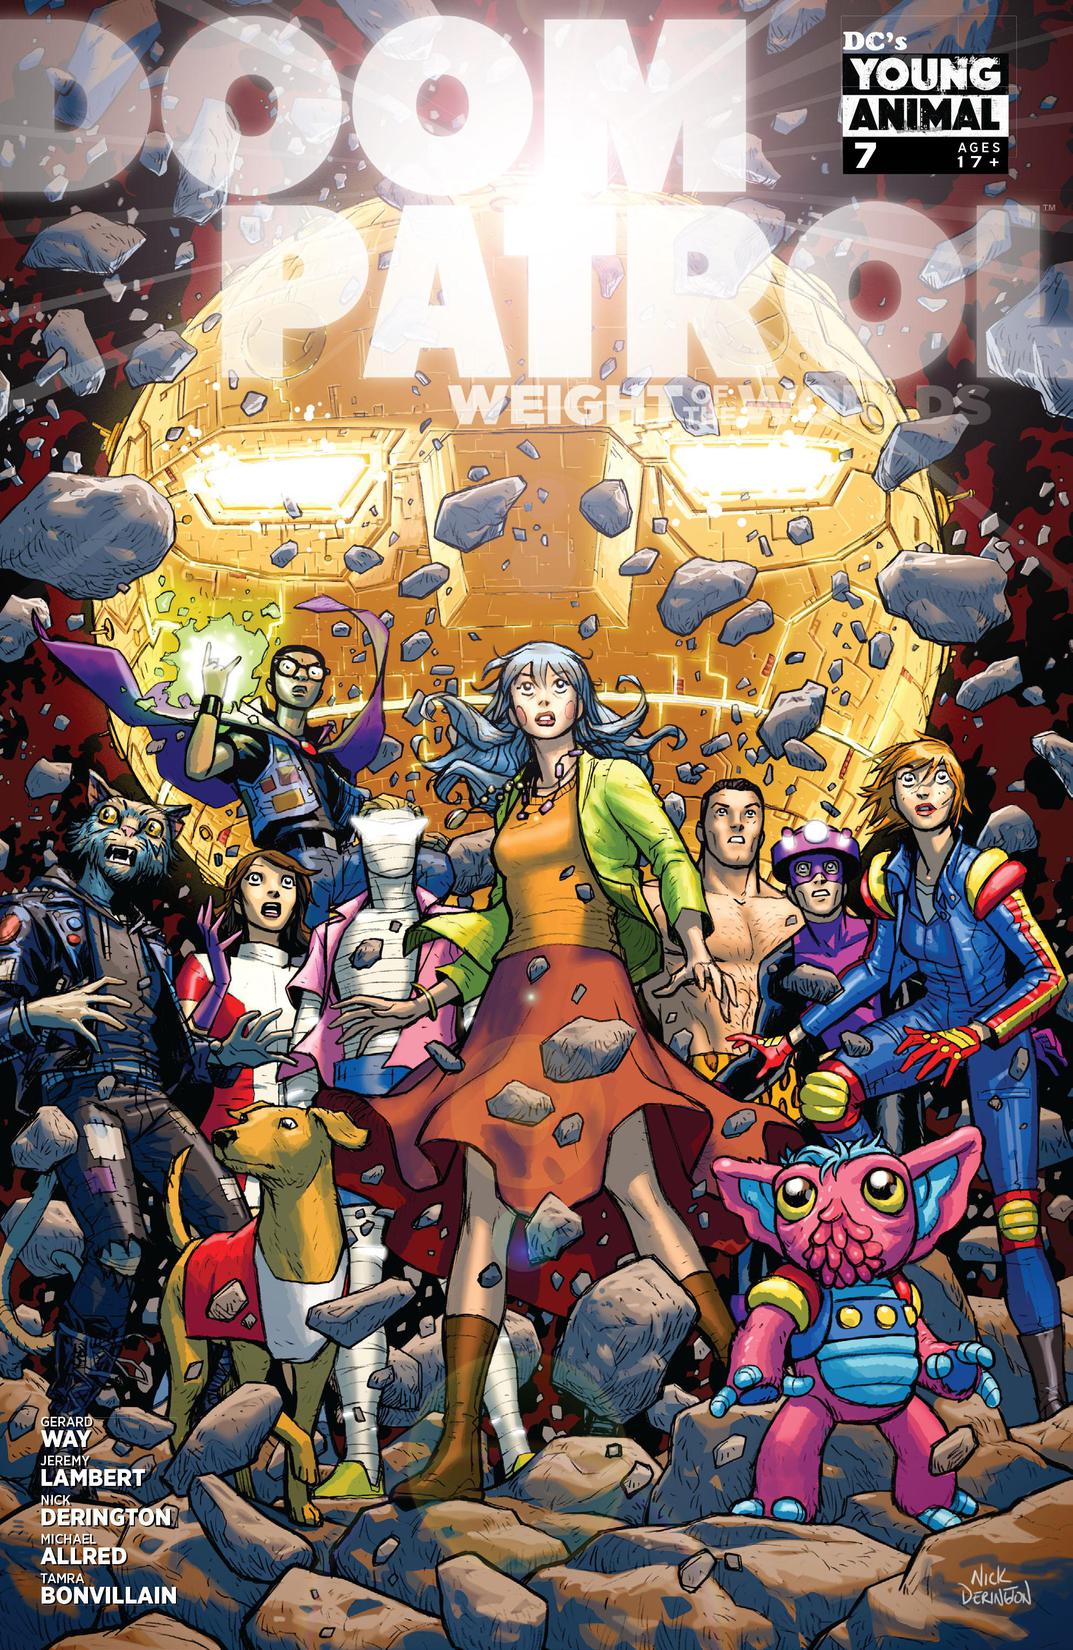 Doom Patrol: Weight of the Worlds #7 preview images